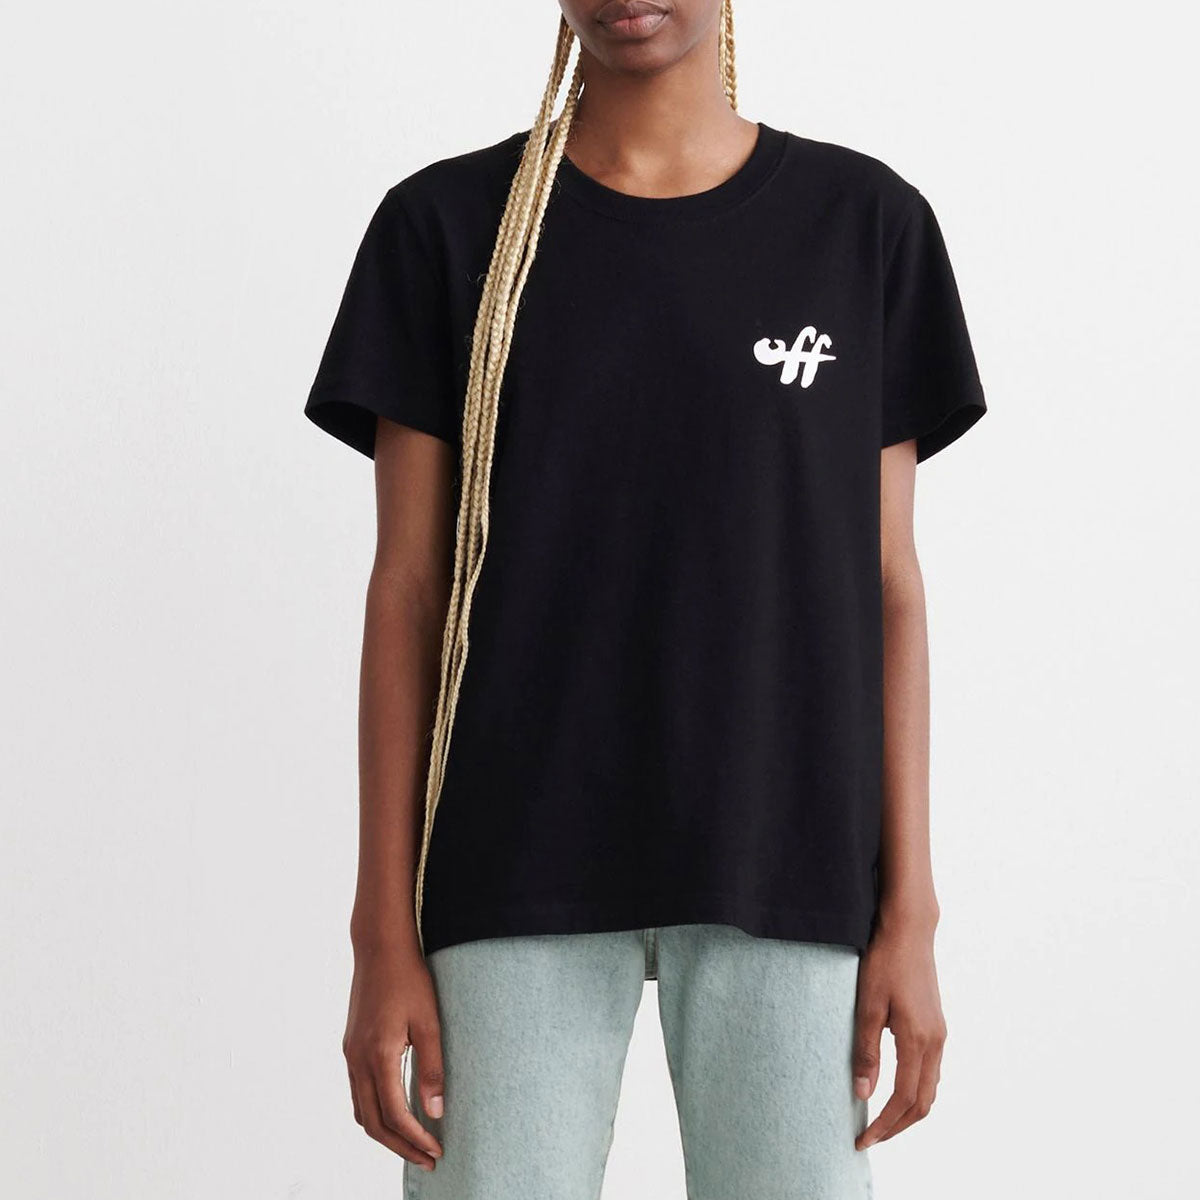 ZEBRA ARROW CASUAL TEE - Why are you here?